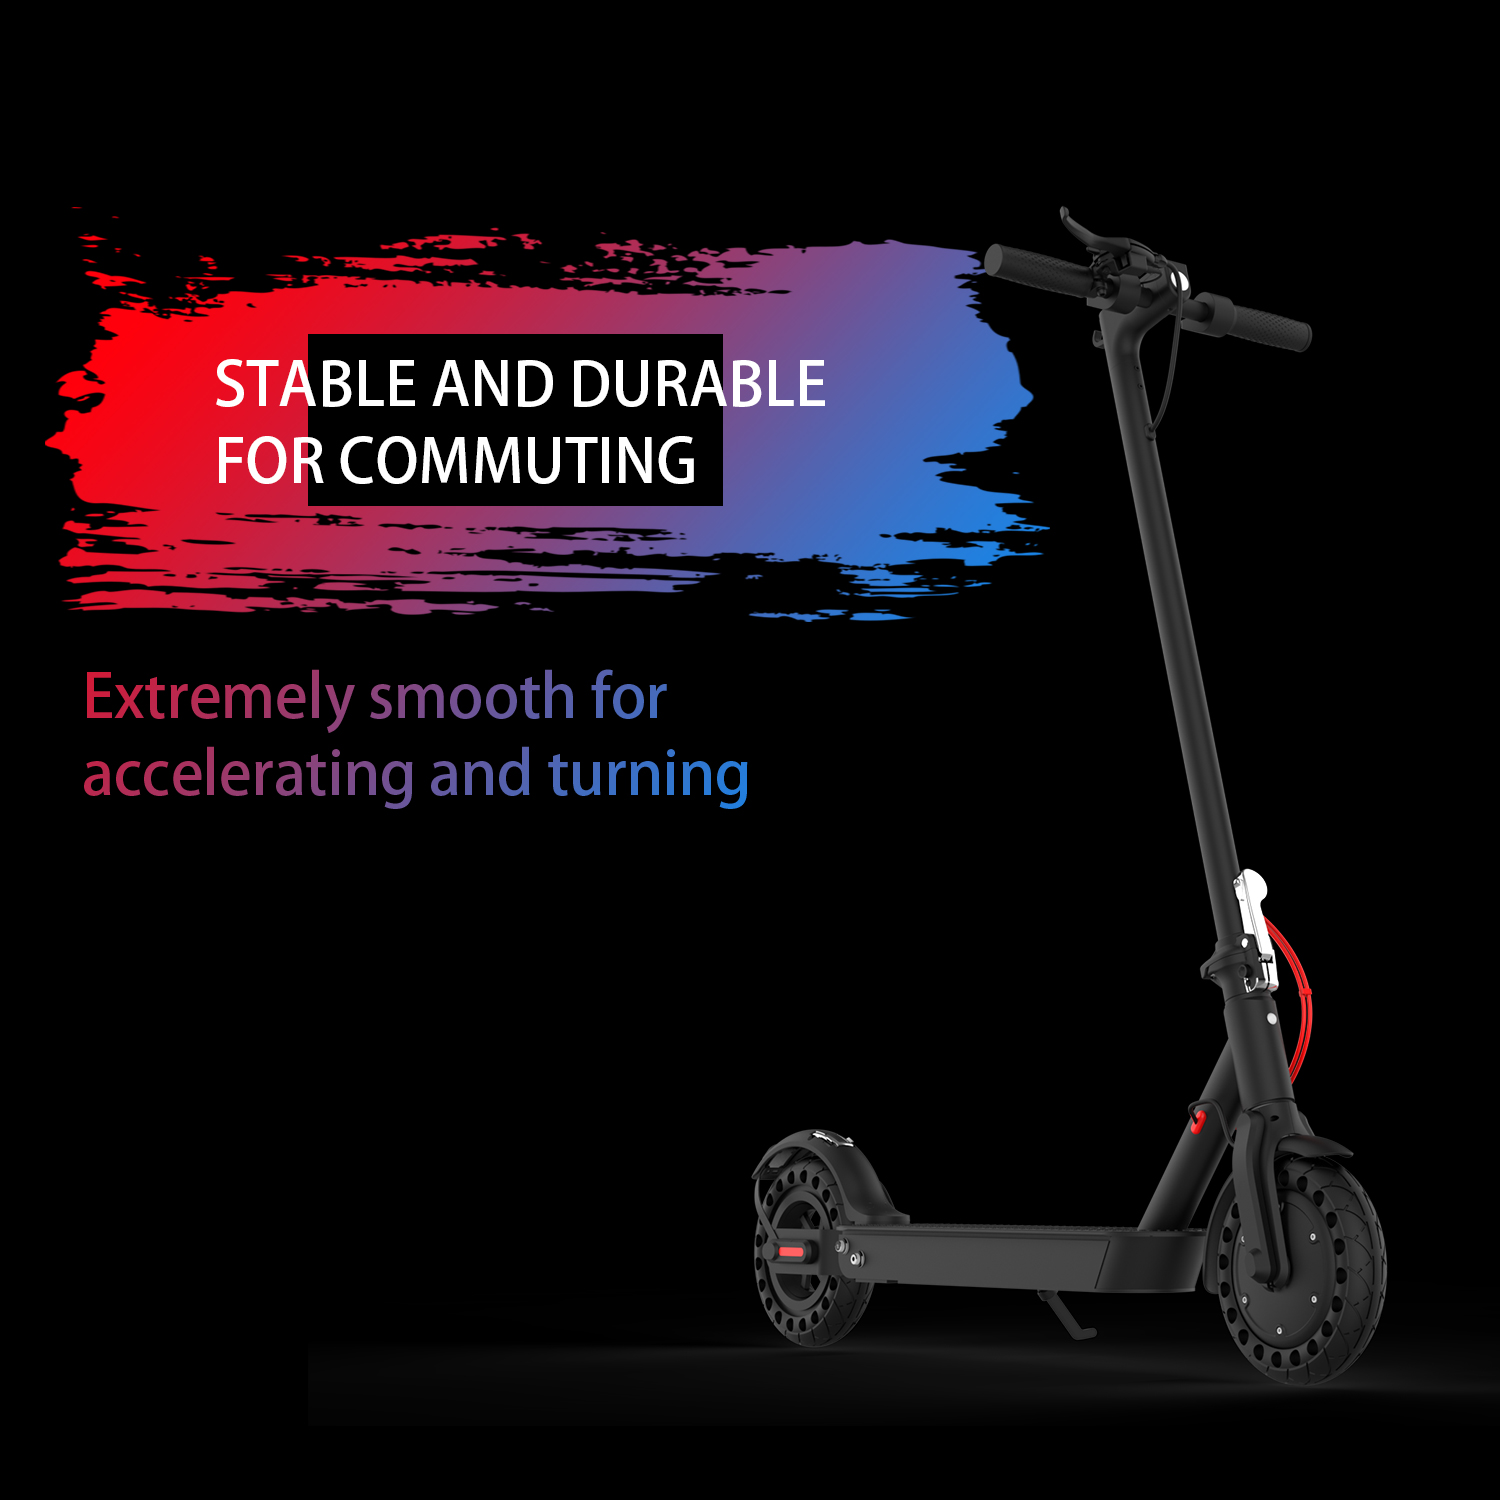 HIBOY S2 E-Scooter stable and durable